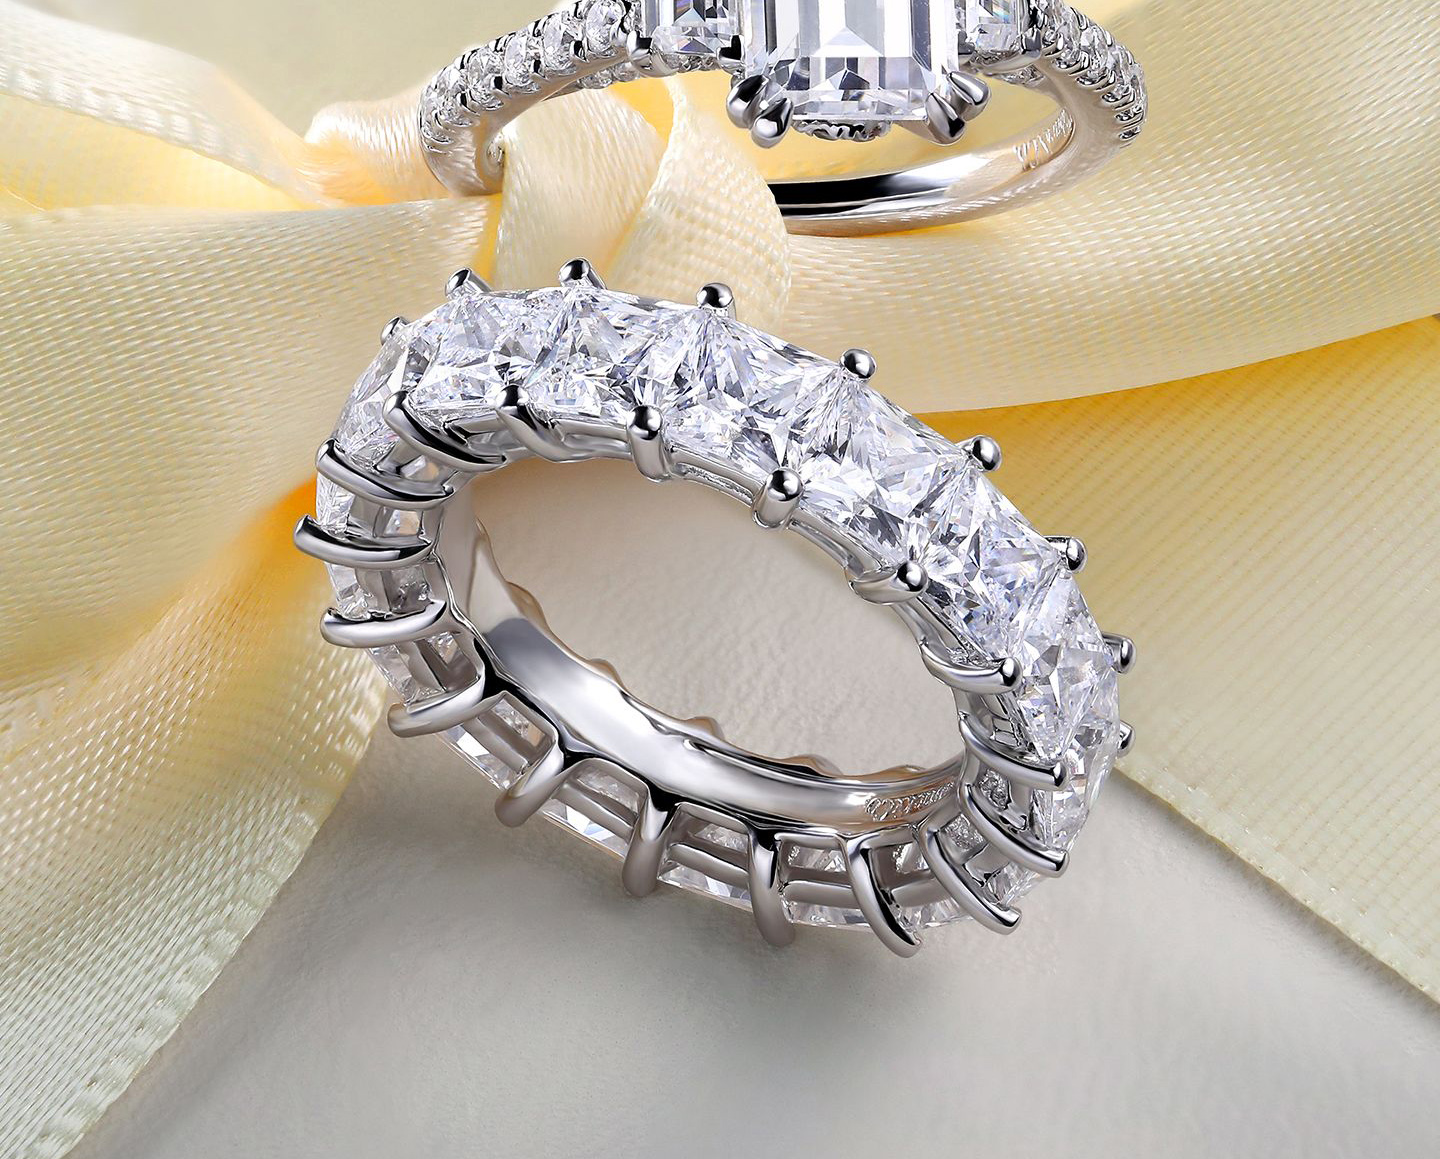 Women's Wedding Bands Toner Jewelers offers a stunning selection of wedding bands to compliment your engagement ring. Our exceptional craftsman individually handcrafts or oversees each ring with careful attention to detail and styling. We offer a variety of styles in order to create a unique heirloom. Toner Jewelers Overland Park, KS